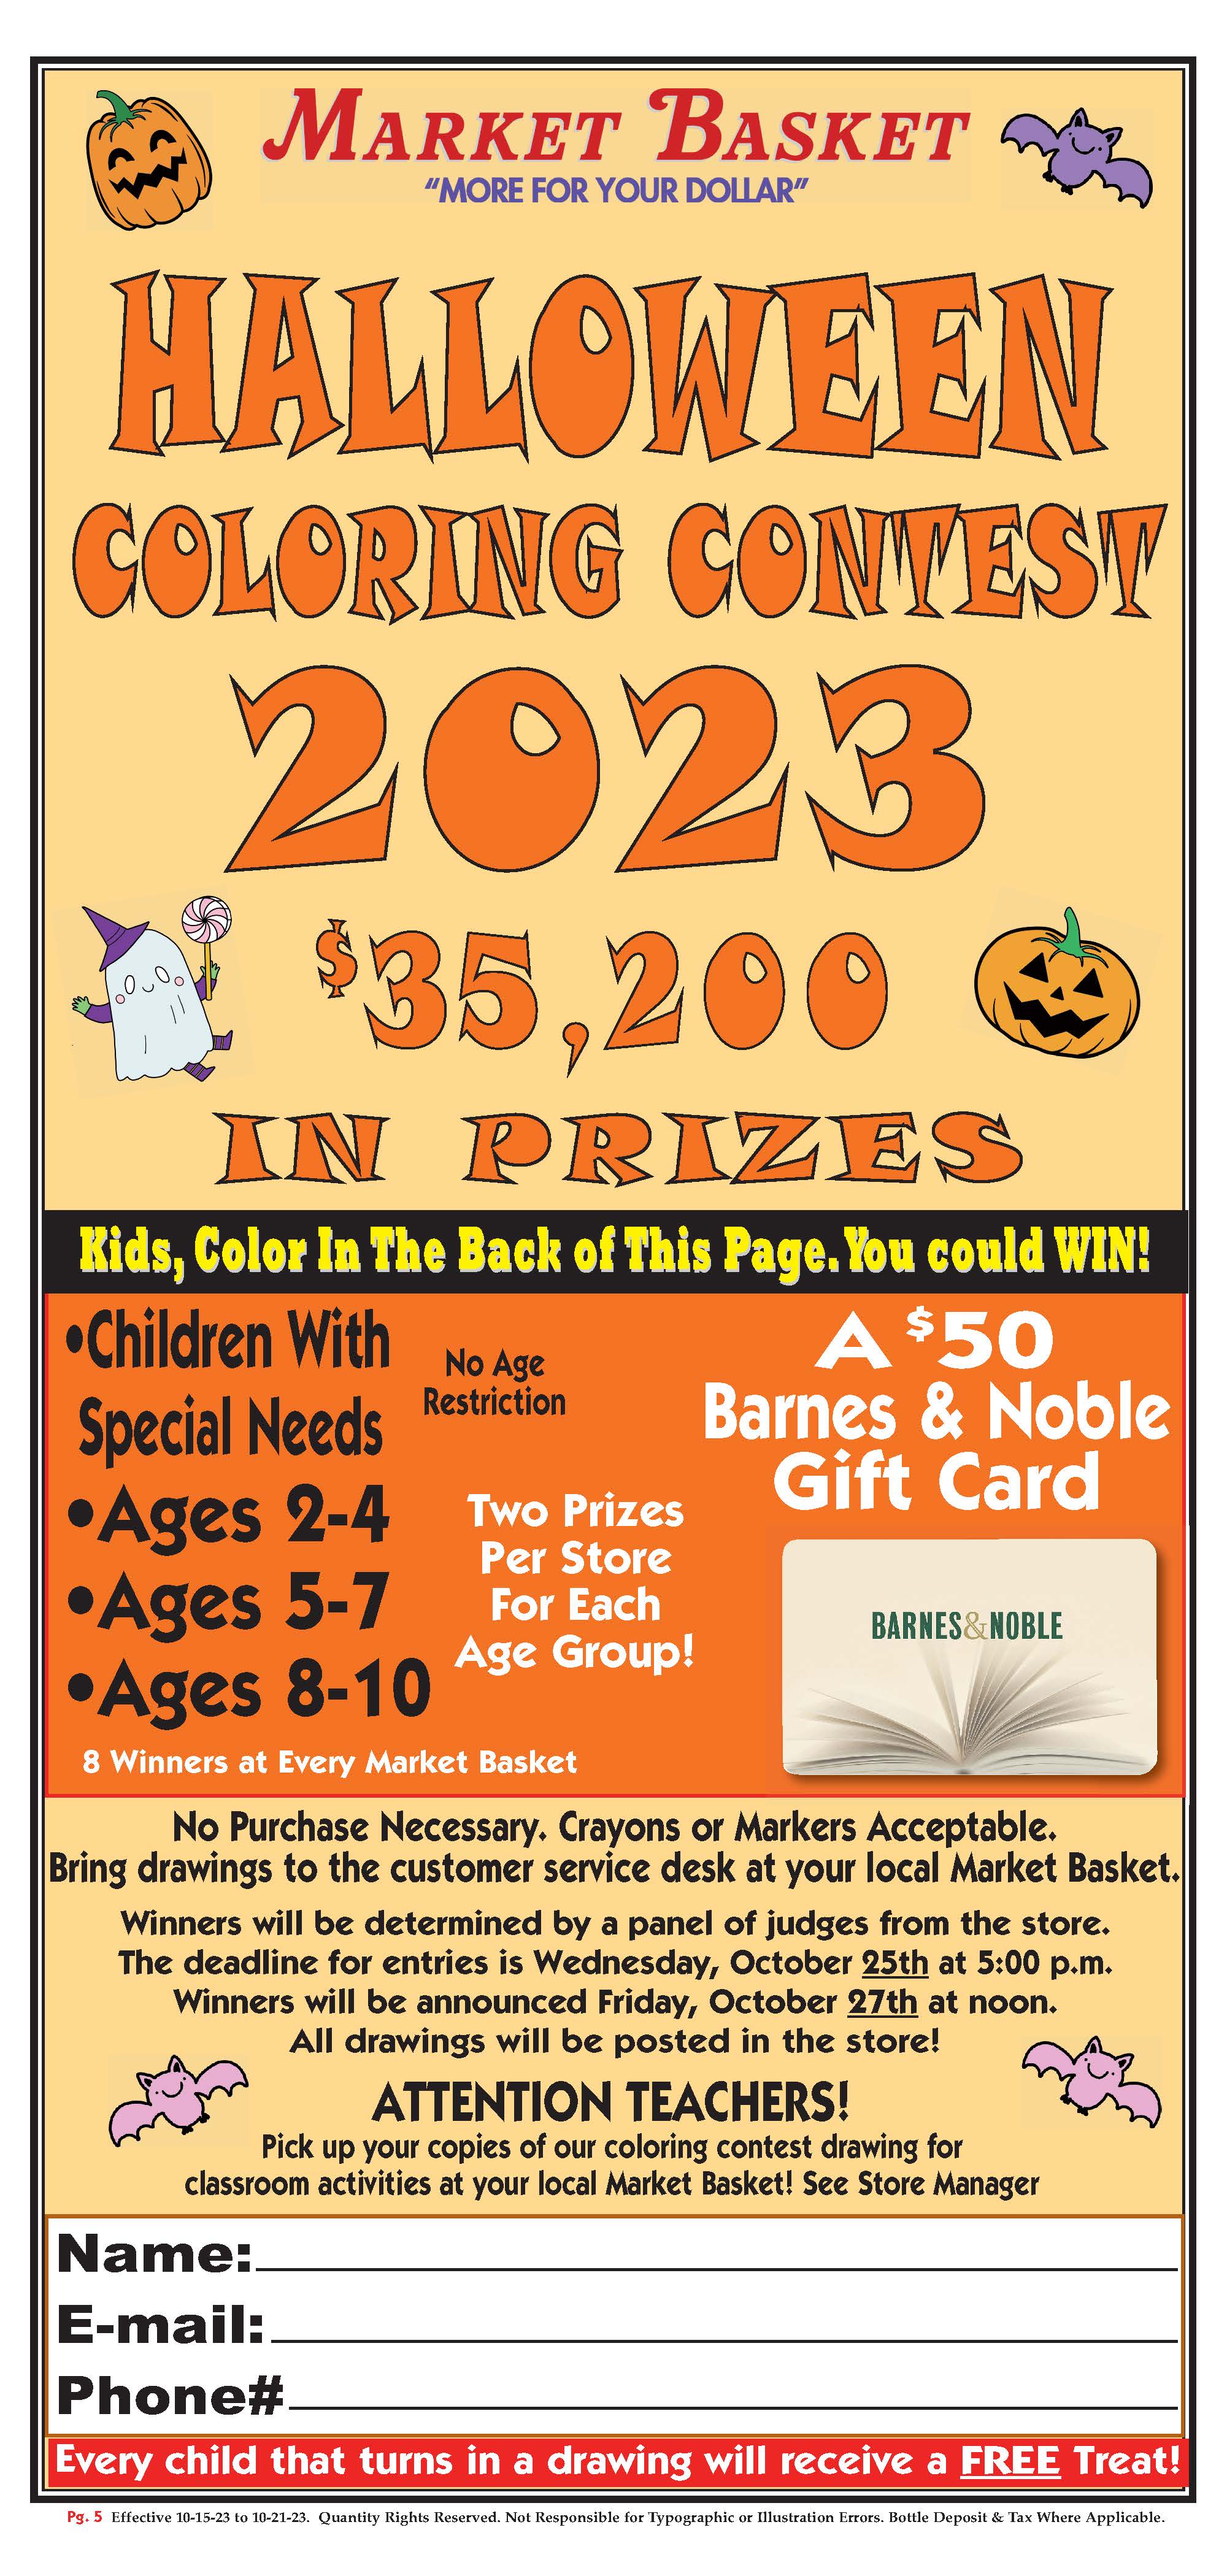 MB Halloween Coloring Contest Explanation